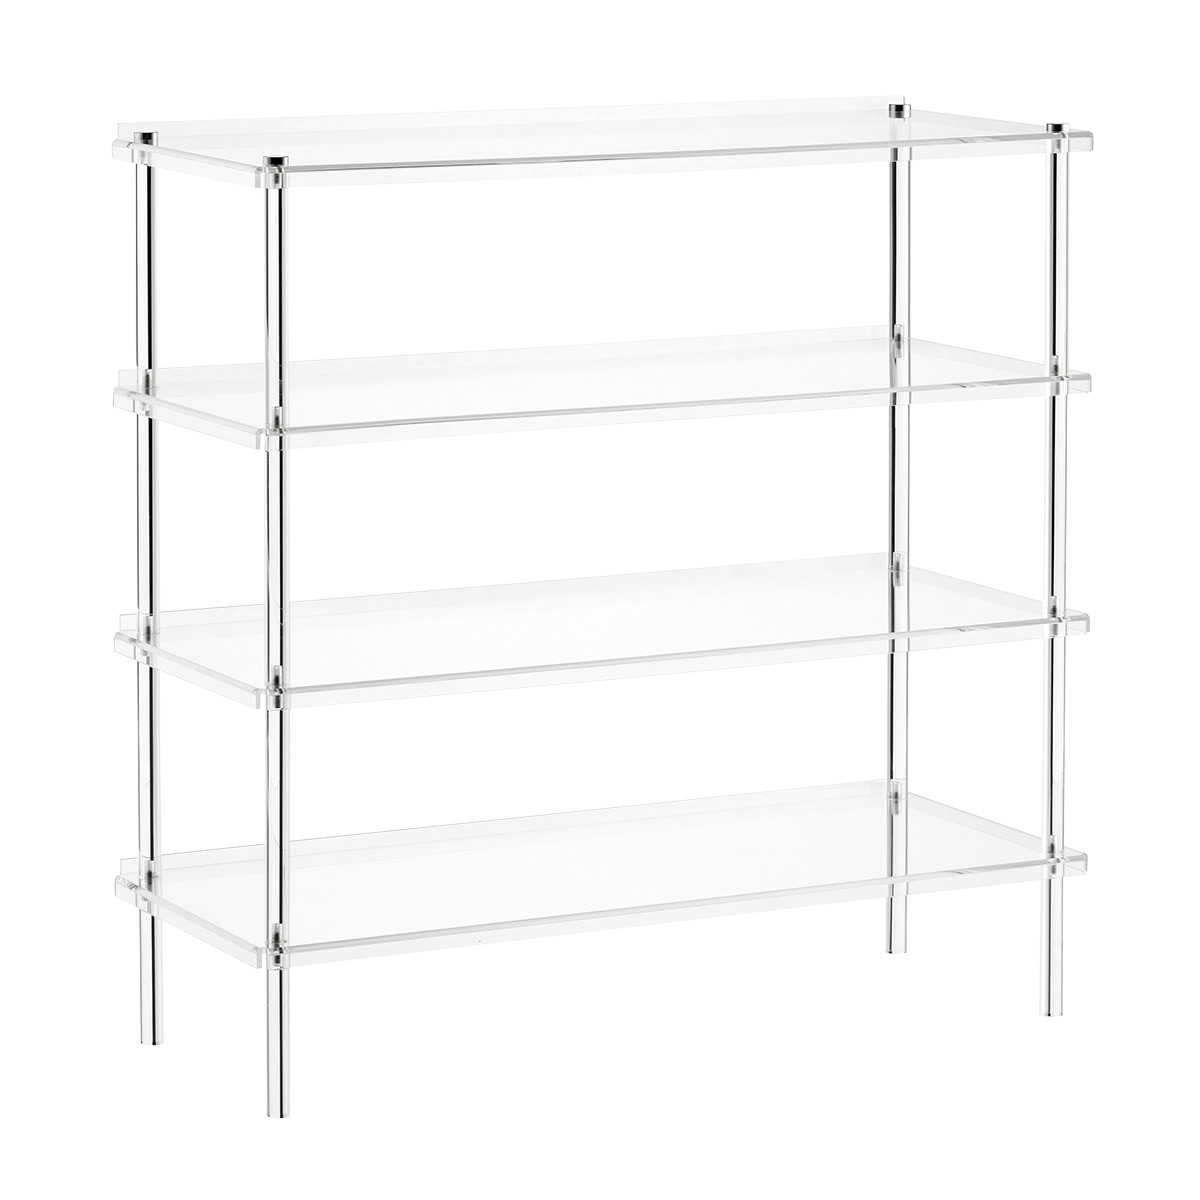 https://www.containerstore.com/catalogimages/517902/10092395-luxe-acrylic-4-tier-shoe-sh.jpg